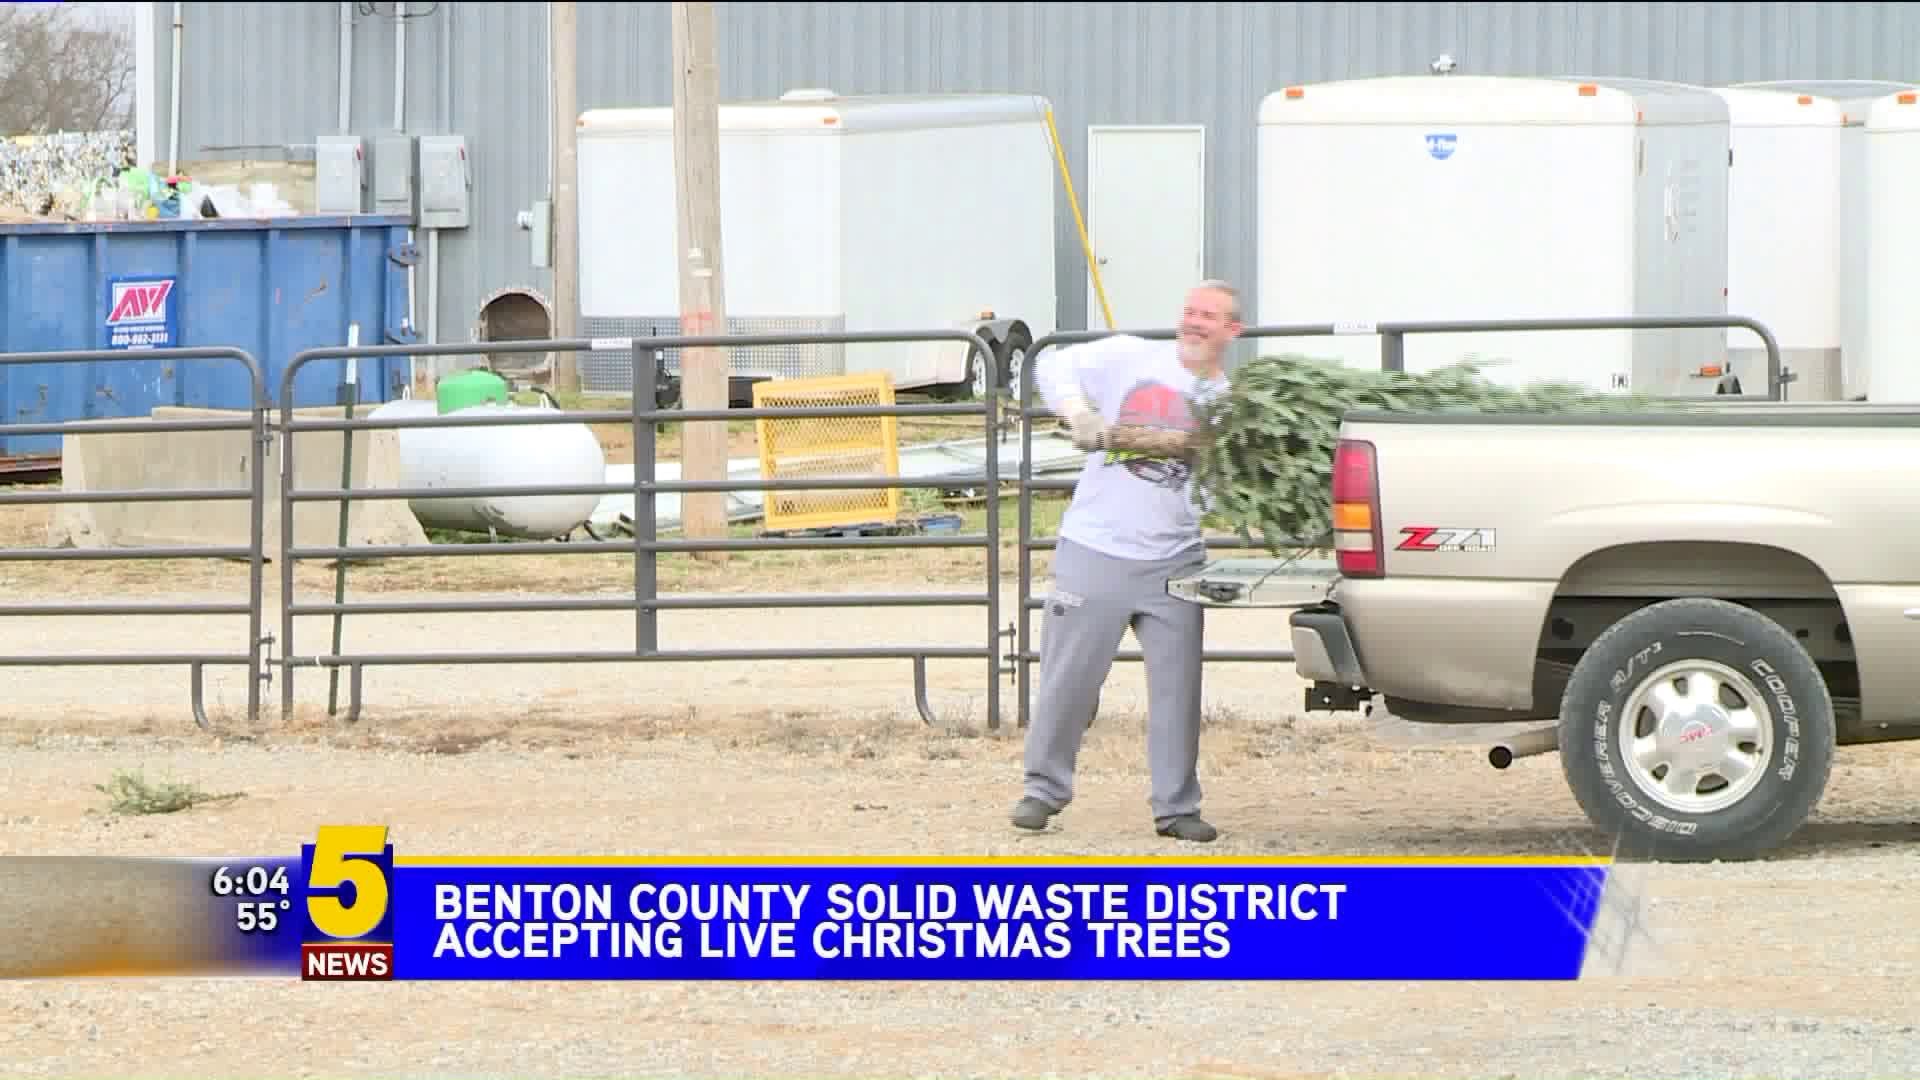 Benton County Solid Waste District Accepting Live Christmas Trees